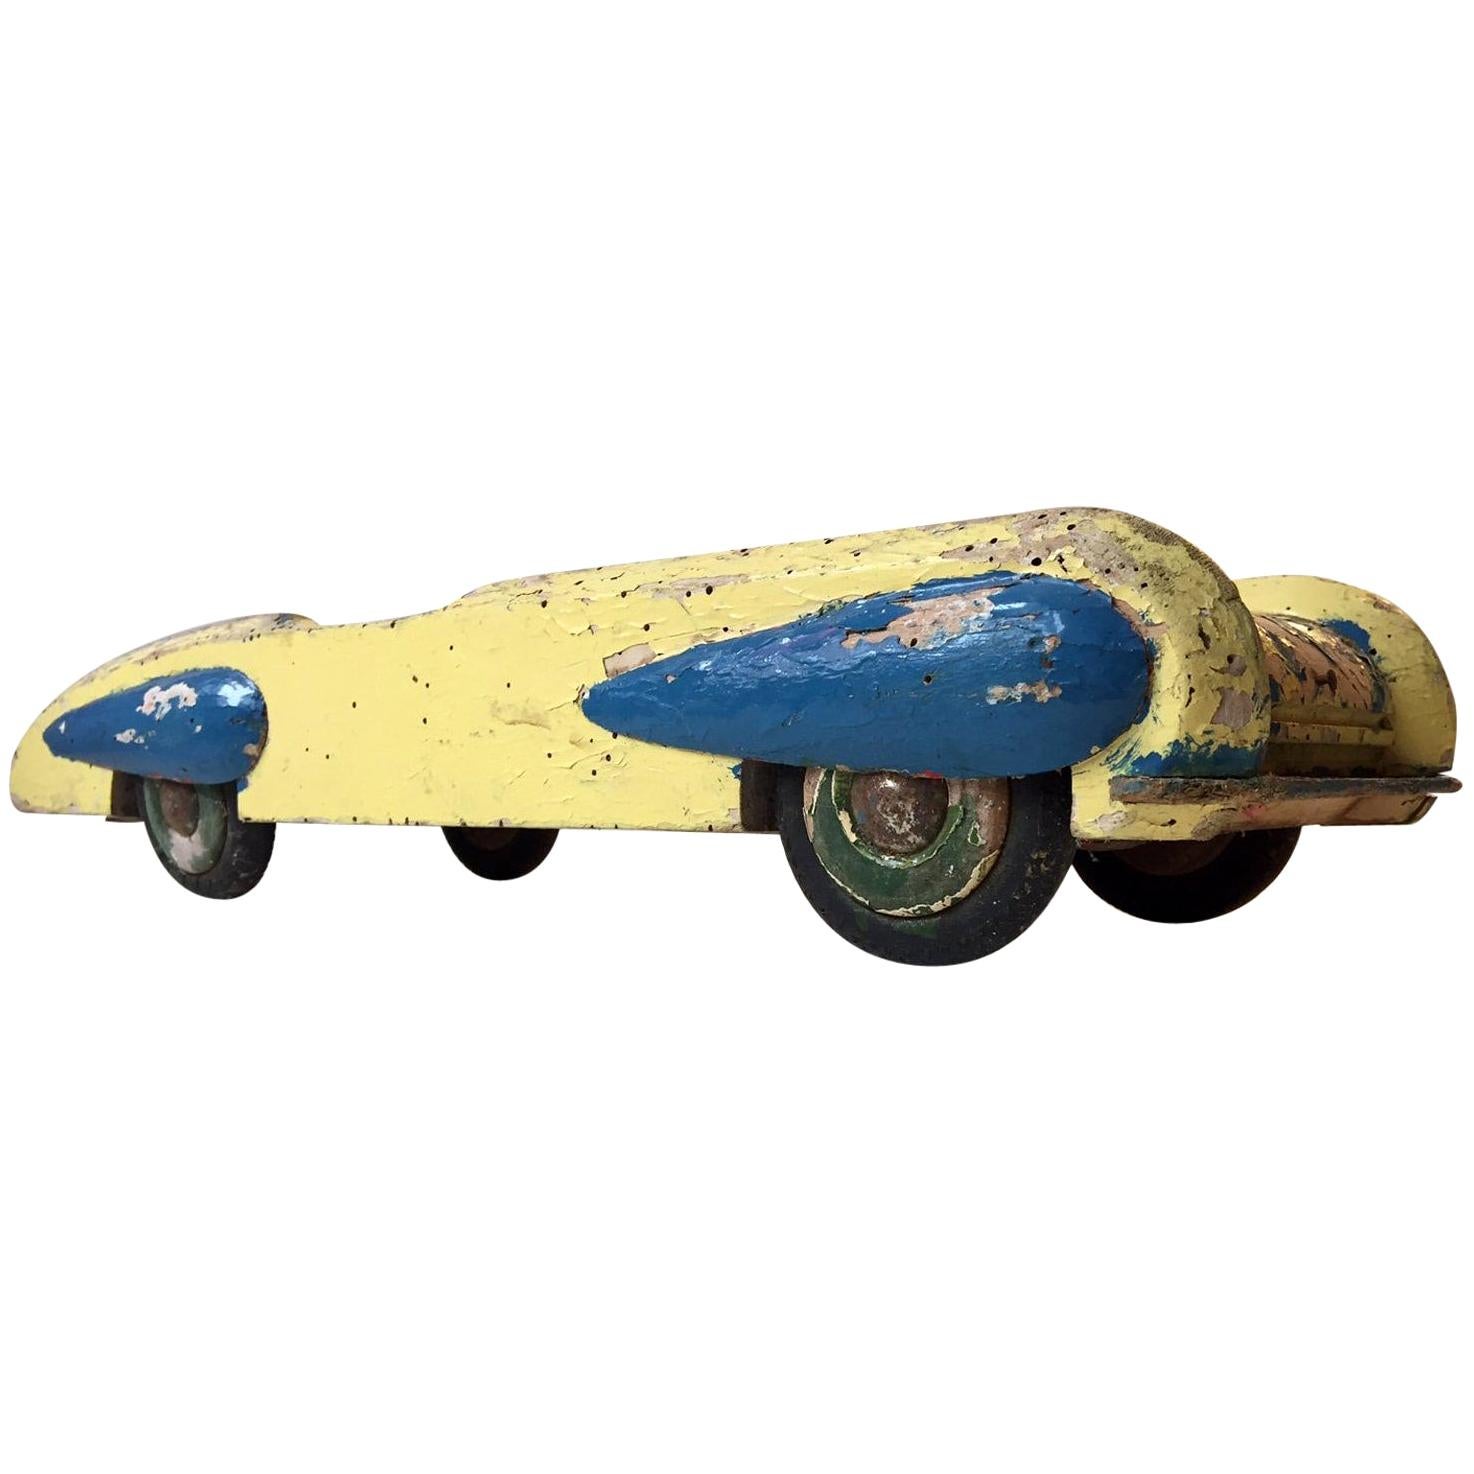 Unusual Wooden Streamline Toy Car with Dunlop Tires, Scandinavia, 1930s